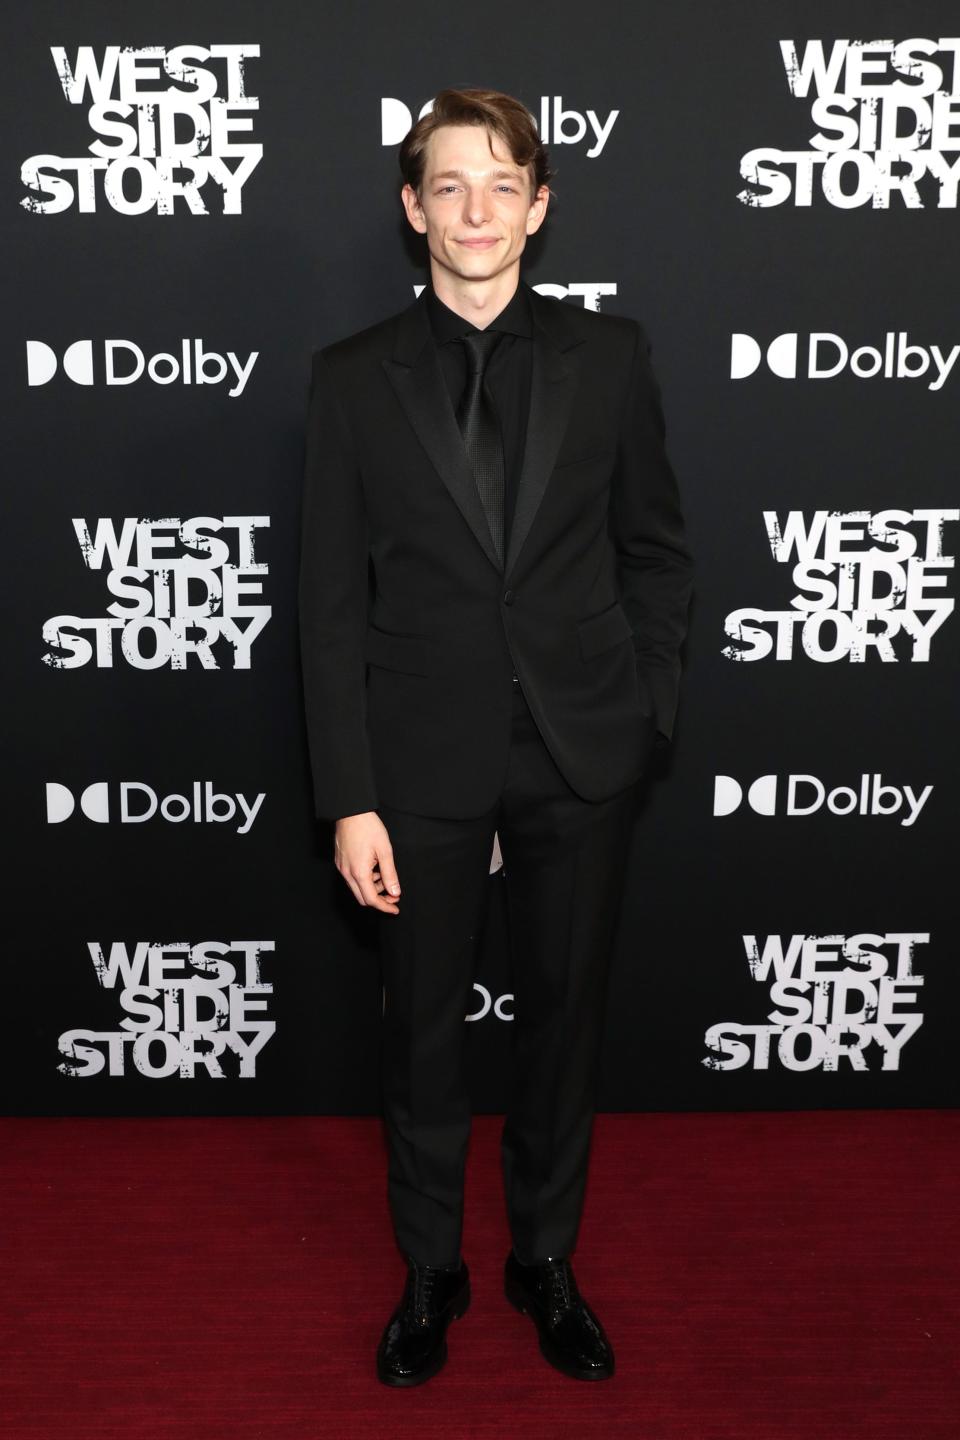 Mike Faist on the "West Side Story" premiere red carpet